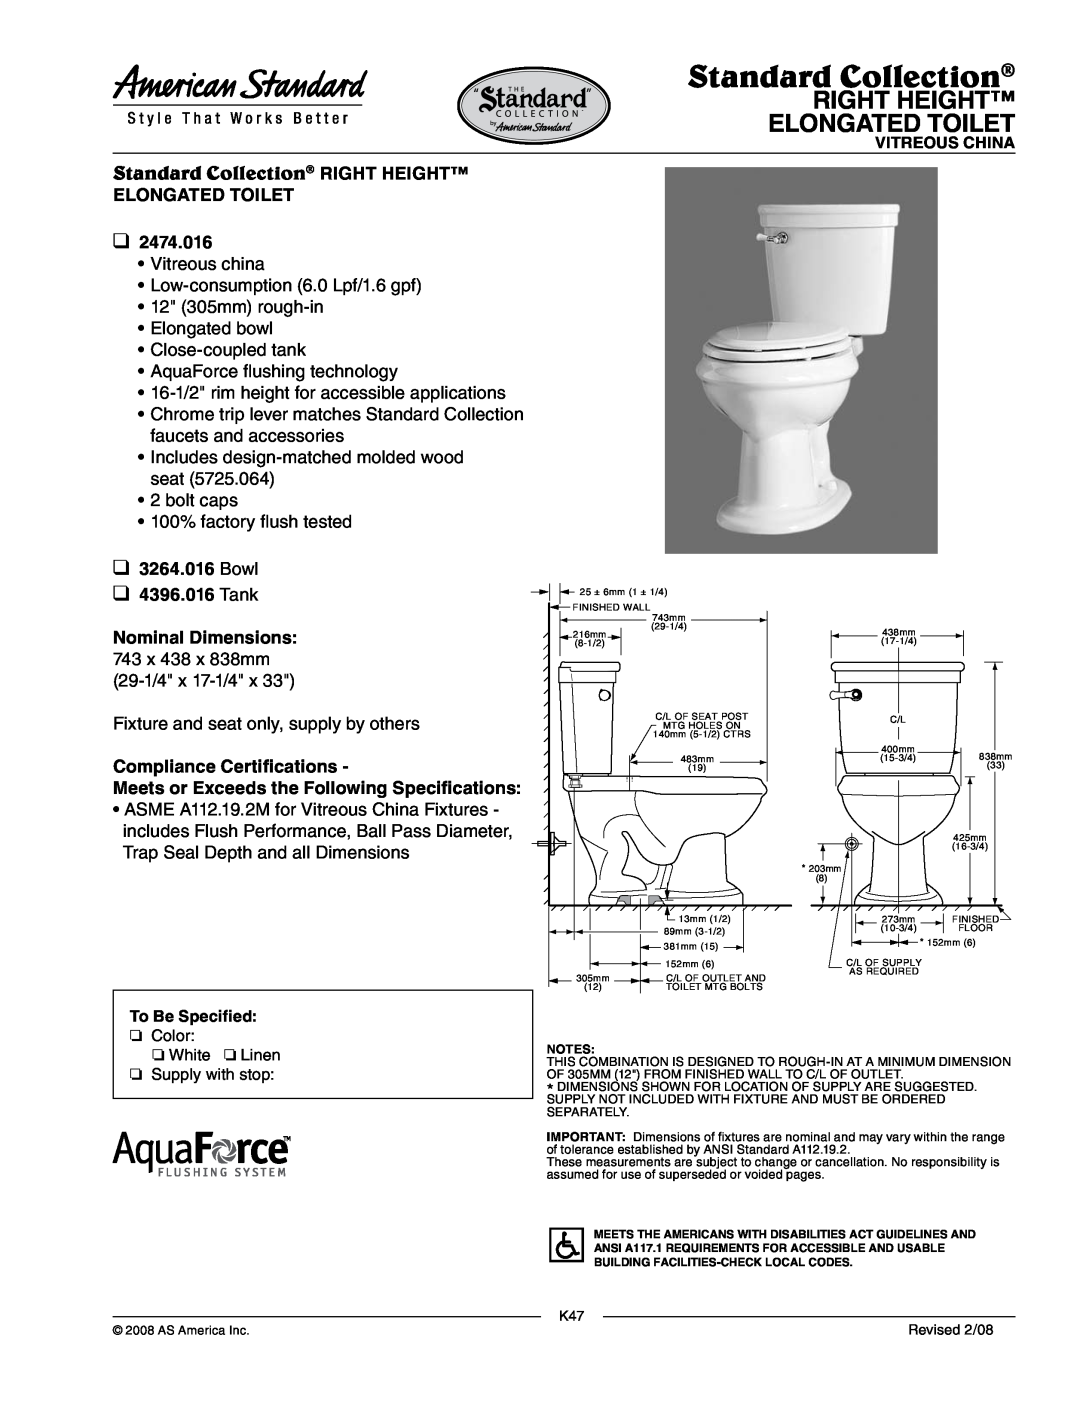 American Standard 4396.016 dimensions Right Height Elongated Toilet, Standard Collection RIGHT HEIGHT, Bowl, Tank 